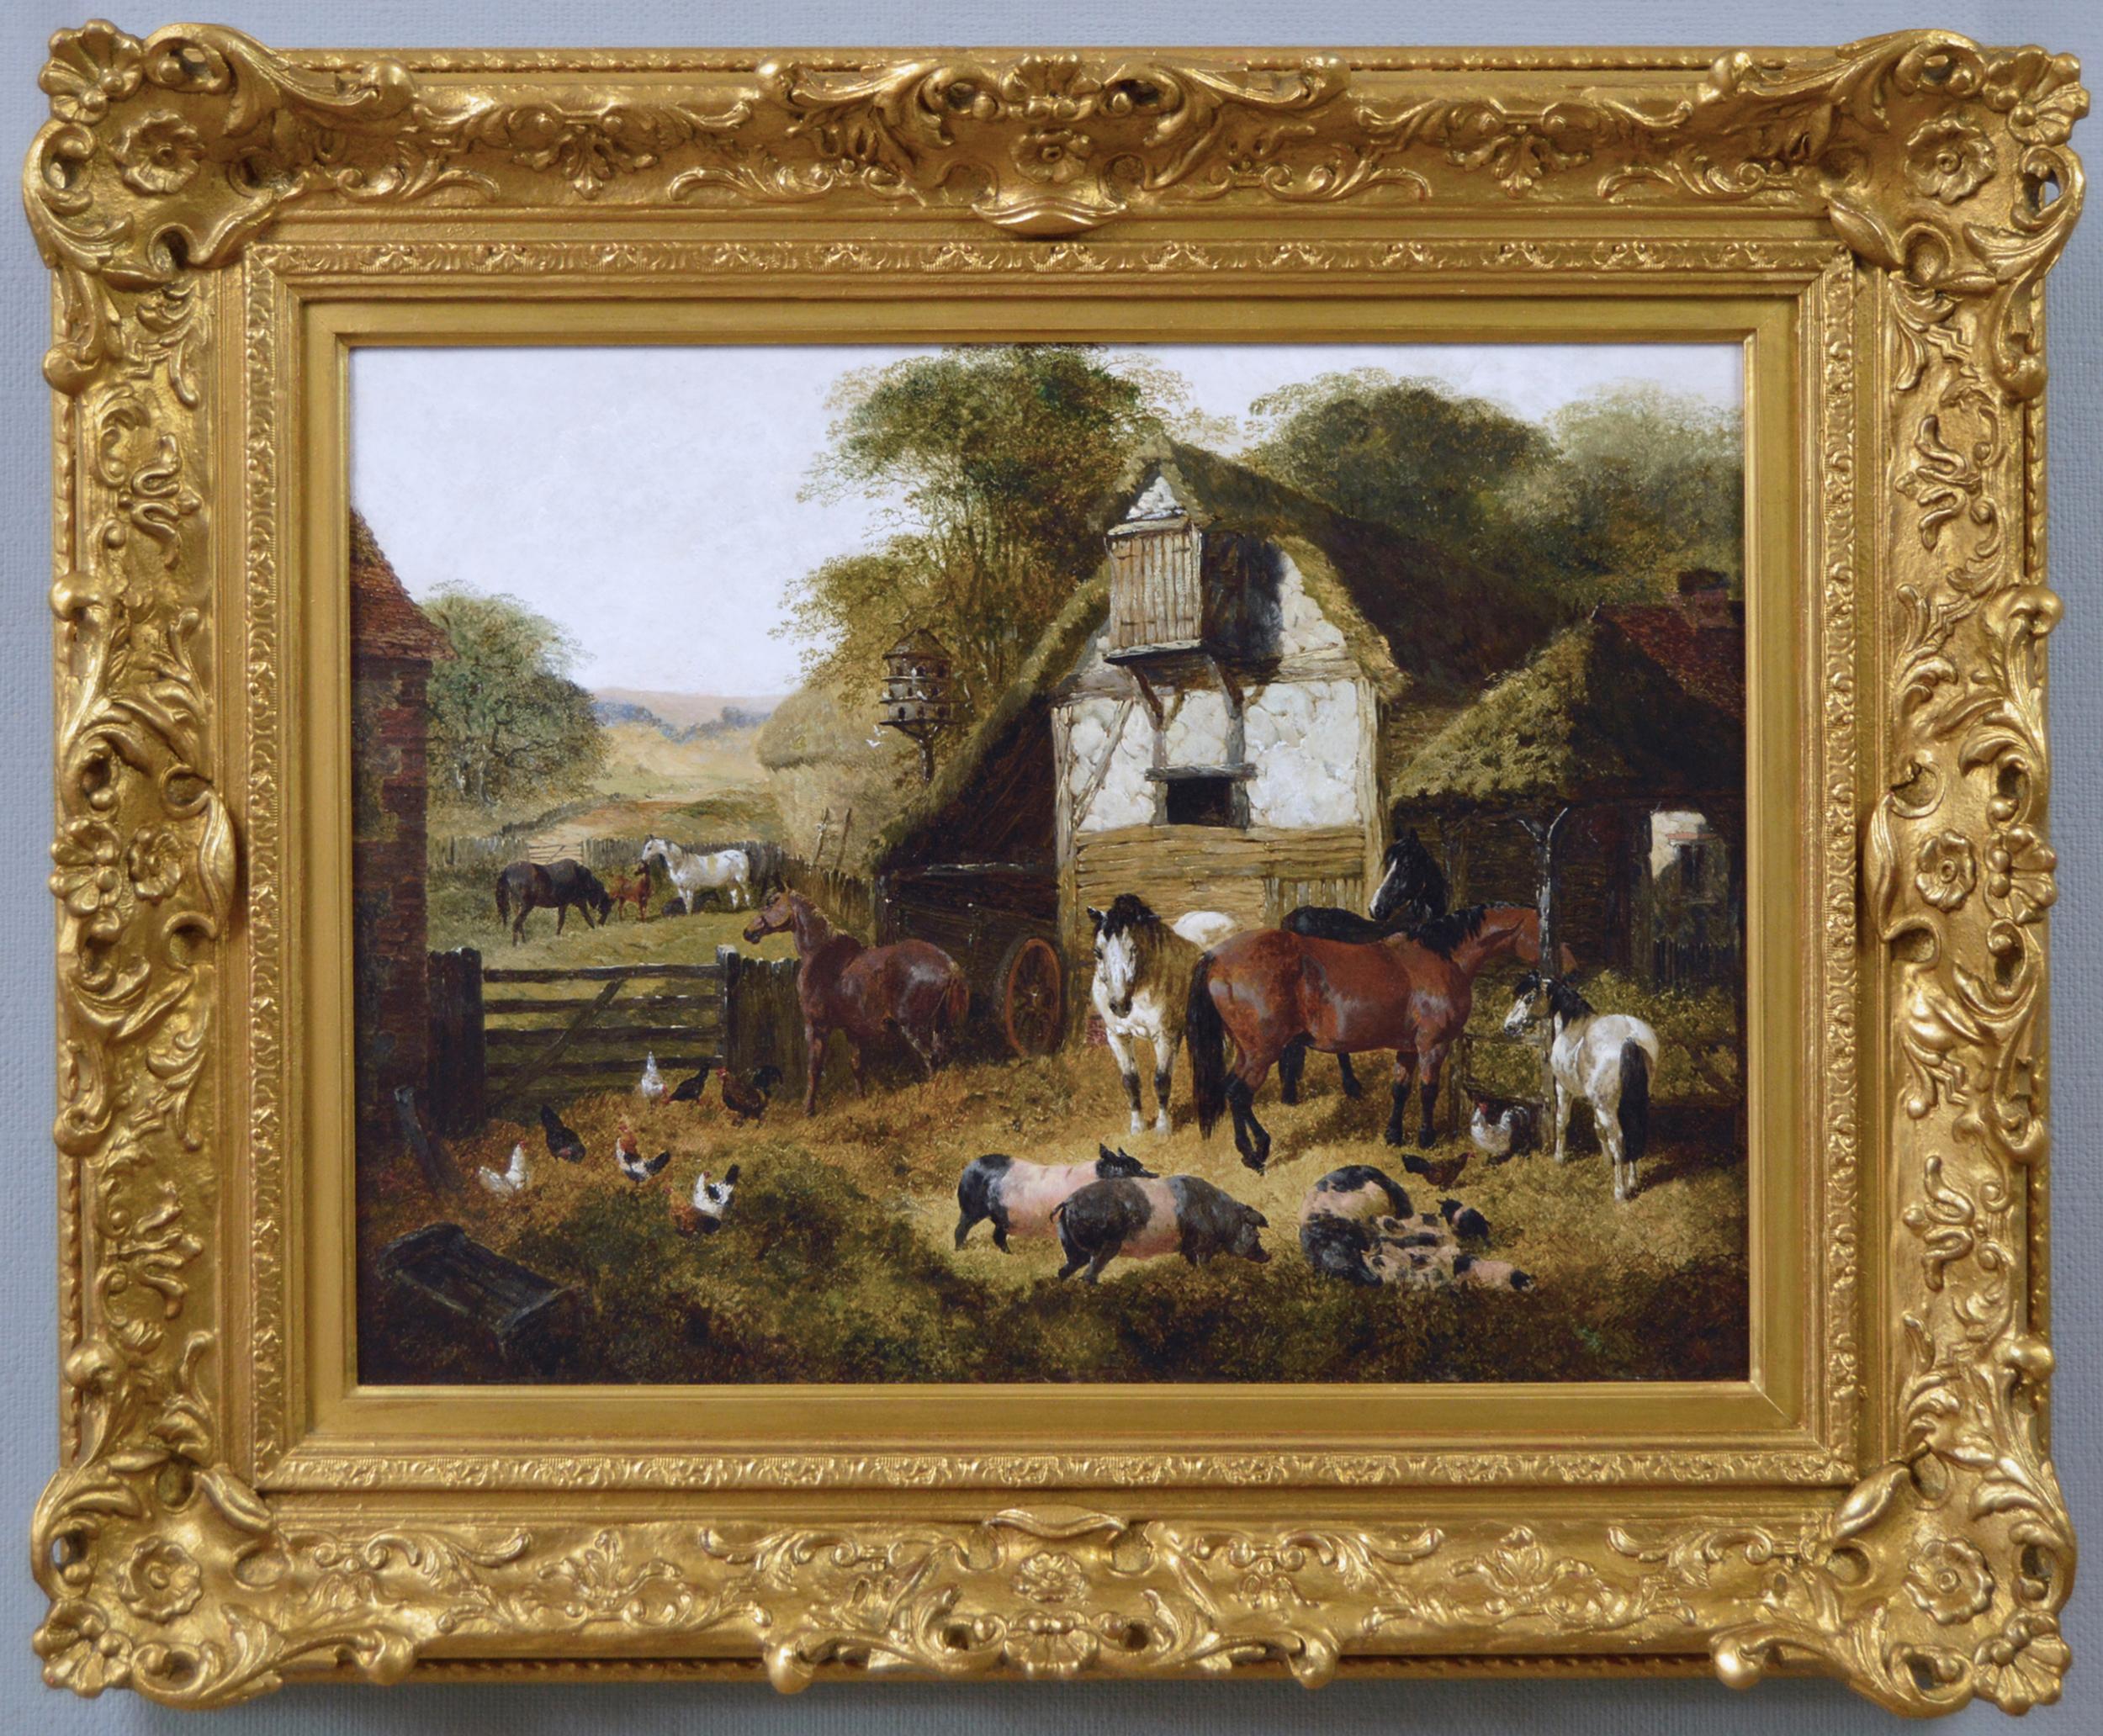 John Frederick Herring Jr. Landscape Painting - 19th Century landscape animal oil painting of a farmyard with horses